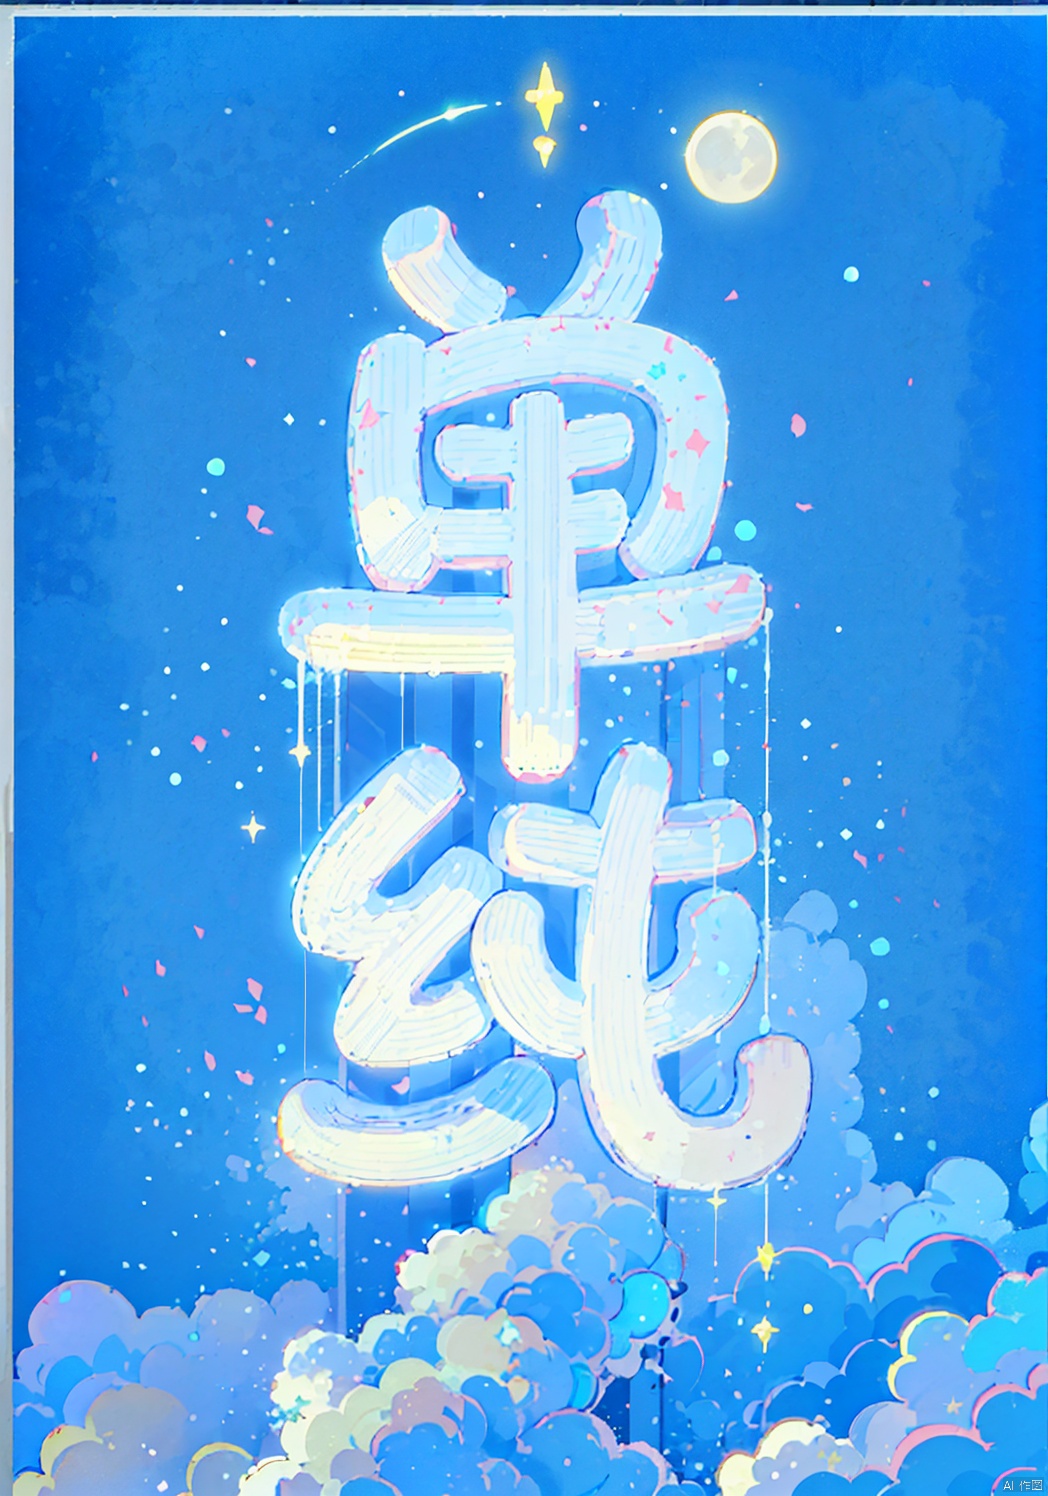 Meteor, night, night sky, Moon, starlight, stars, points of light, light spots, hand-painted style, illustration style, cartoon, (White cloud: 0.1), niji style, pure, great works, Japanese anime, clear picture quality, rich details